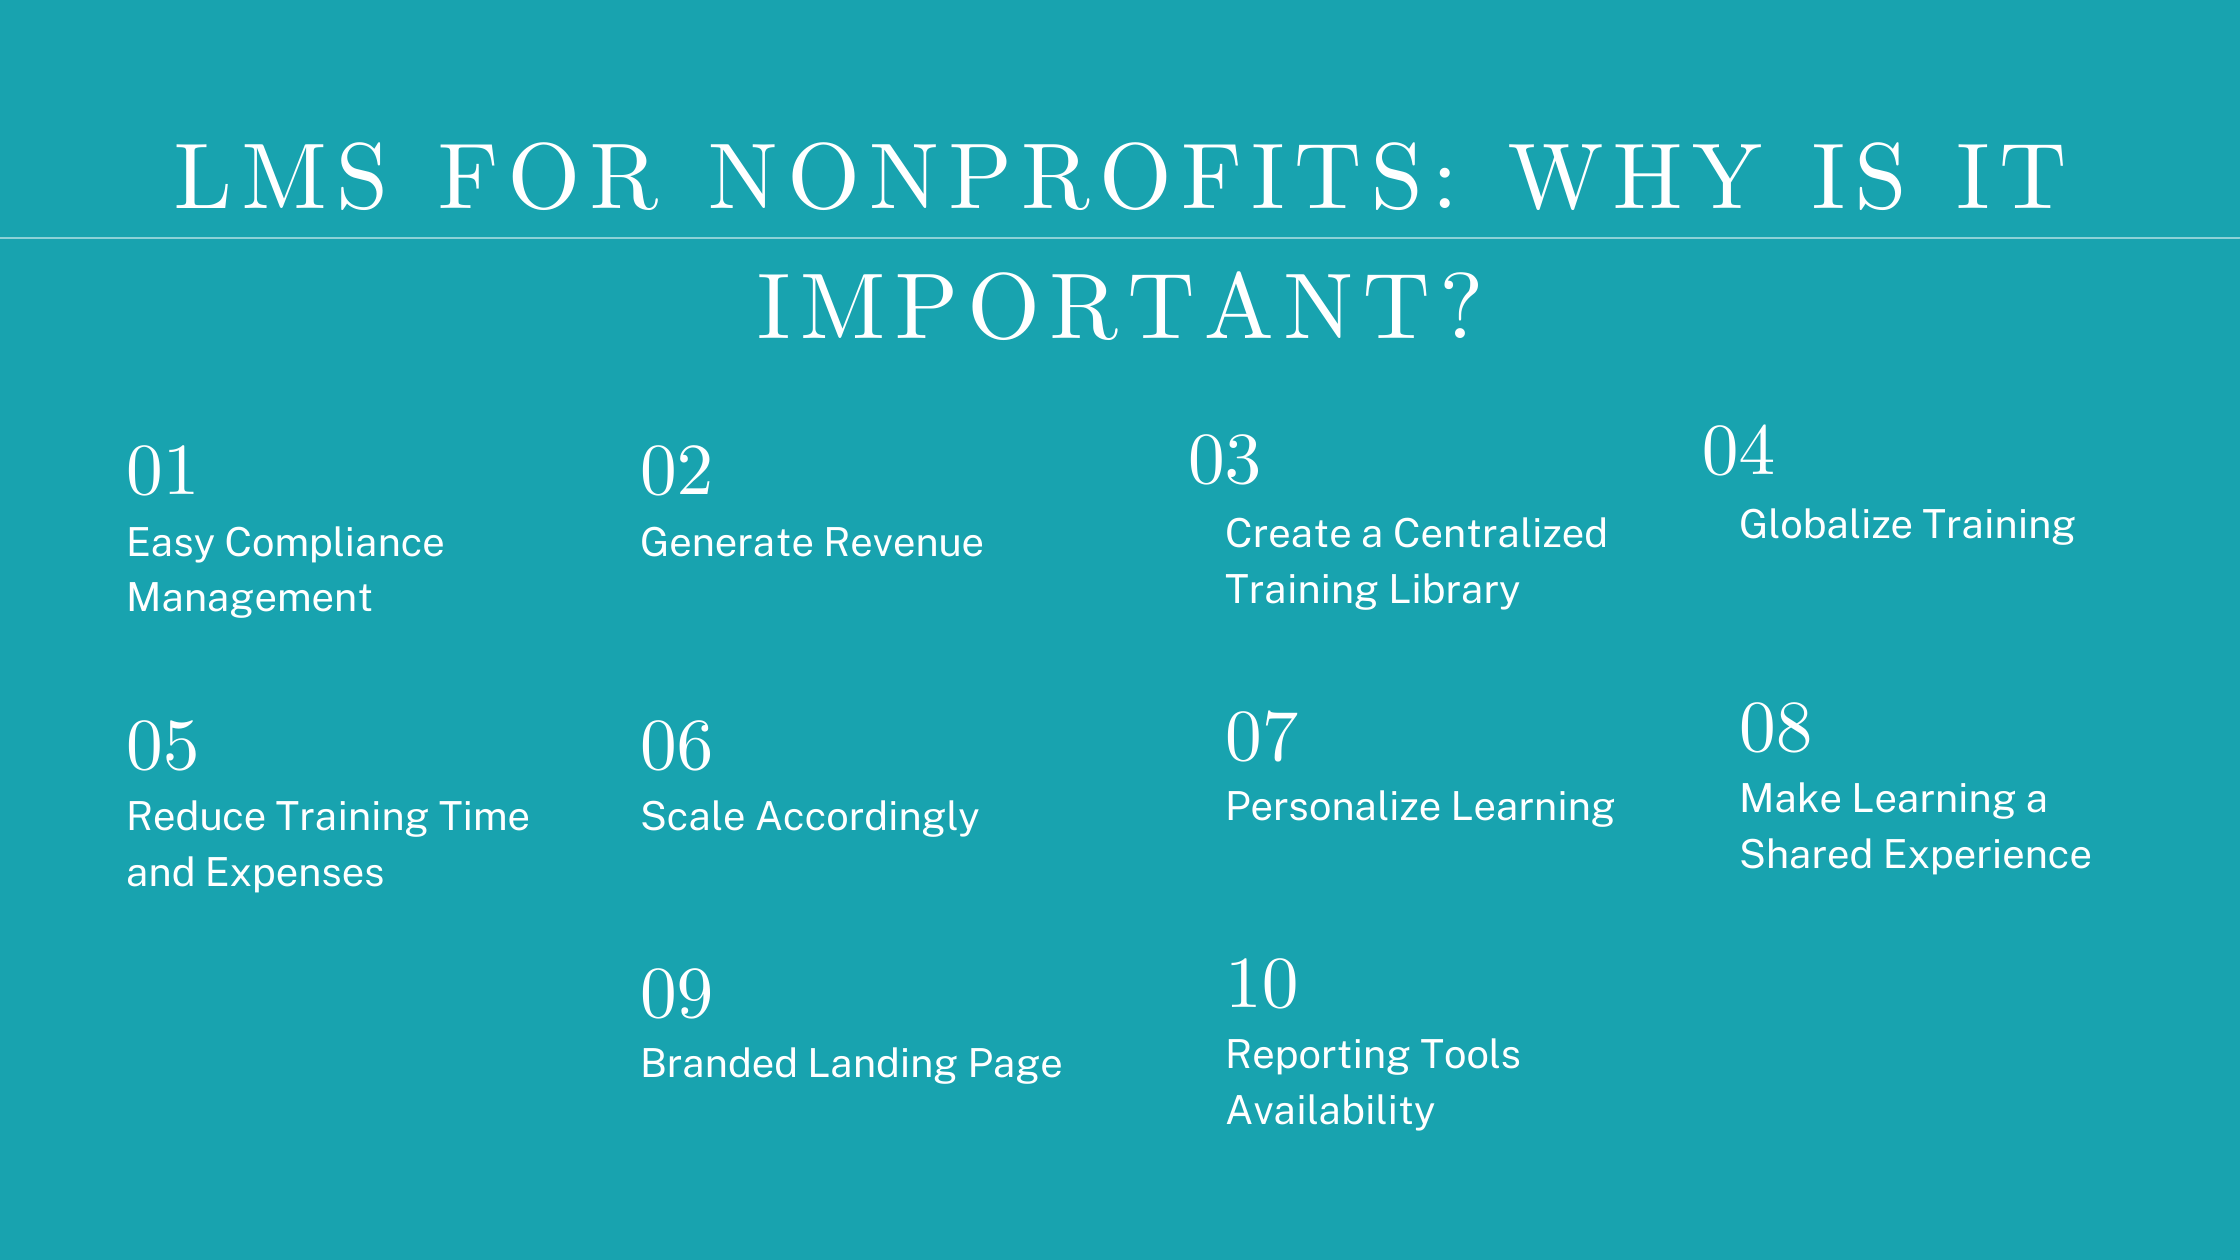 LMS for Nonprofits: Why is it Important?